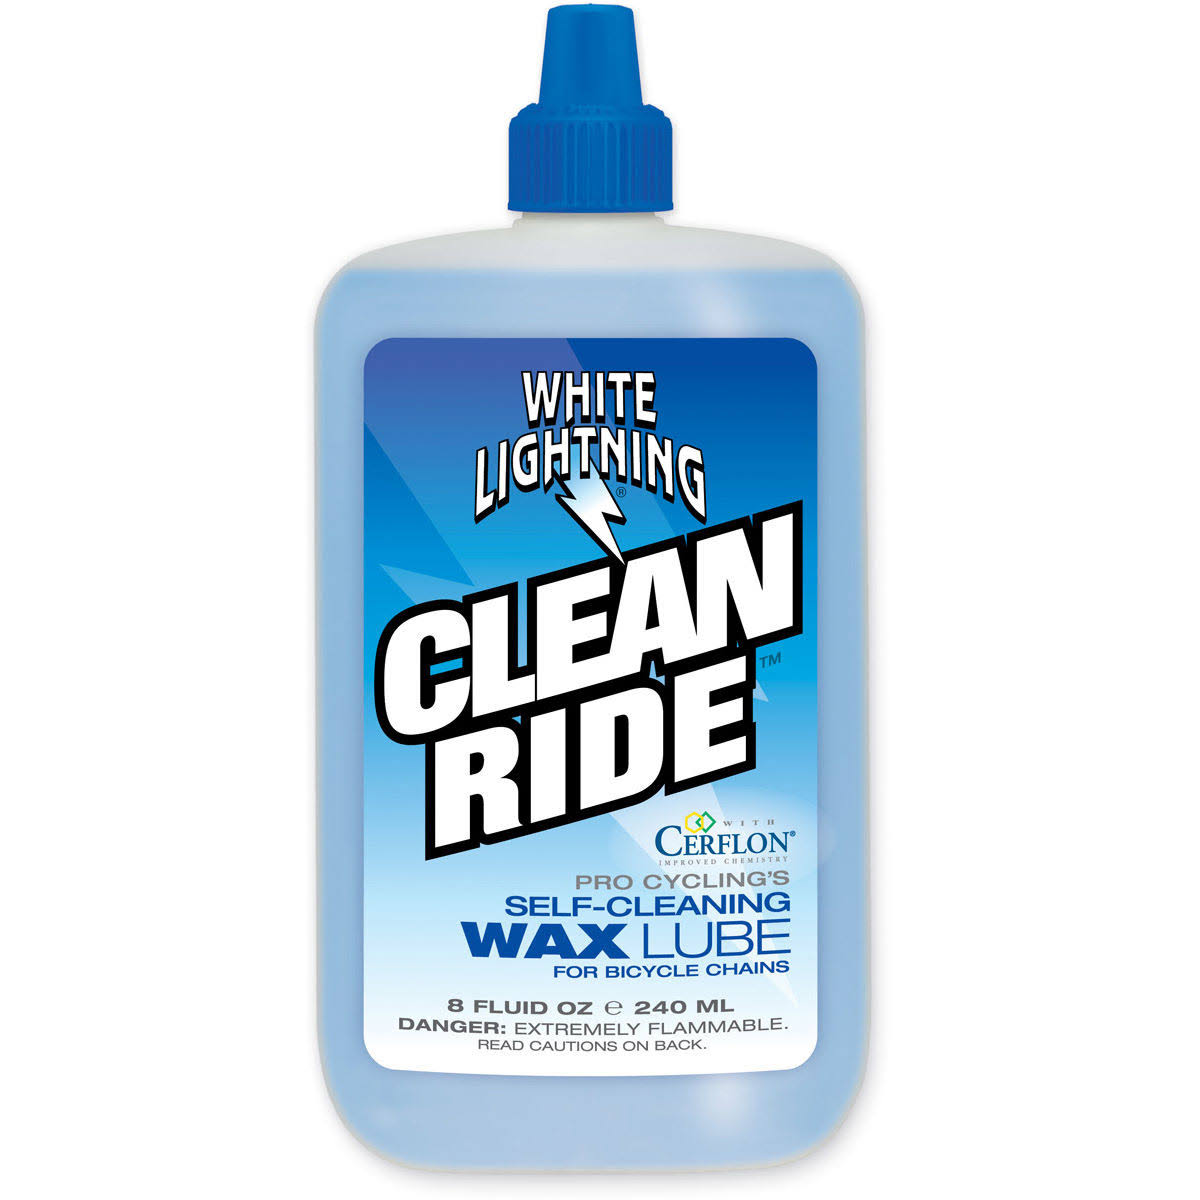 White Lightning Bicycle Chain Lubricant